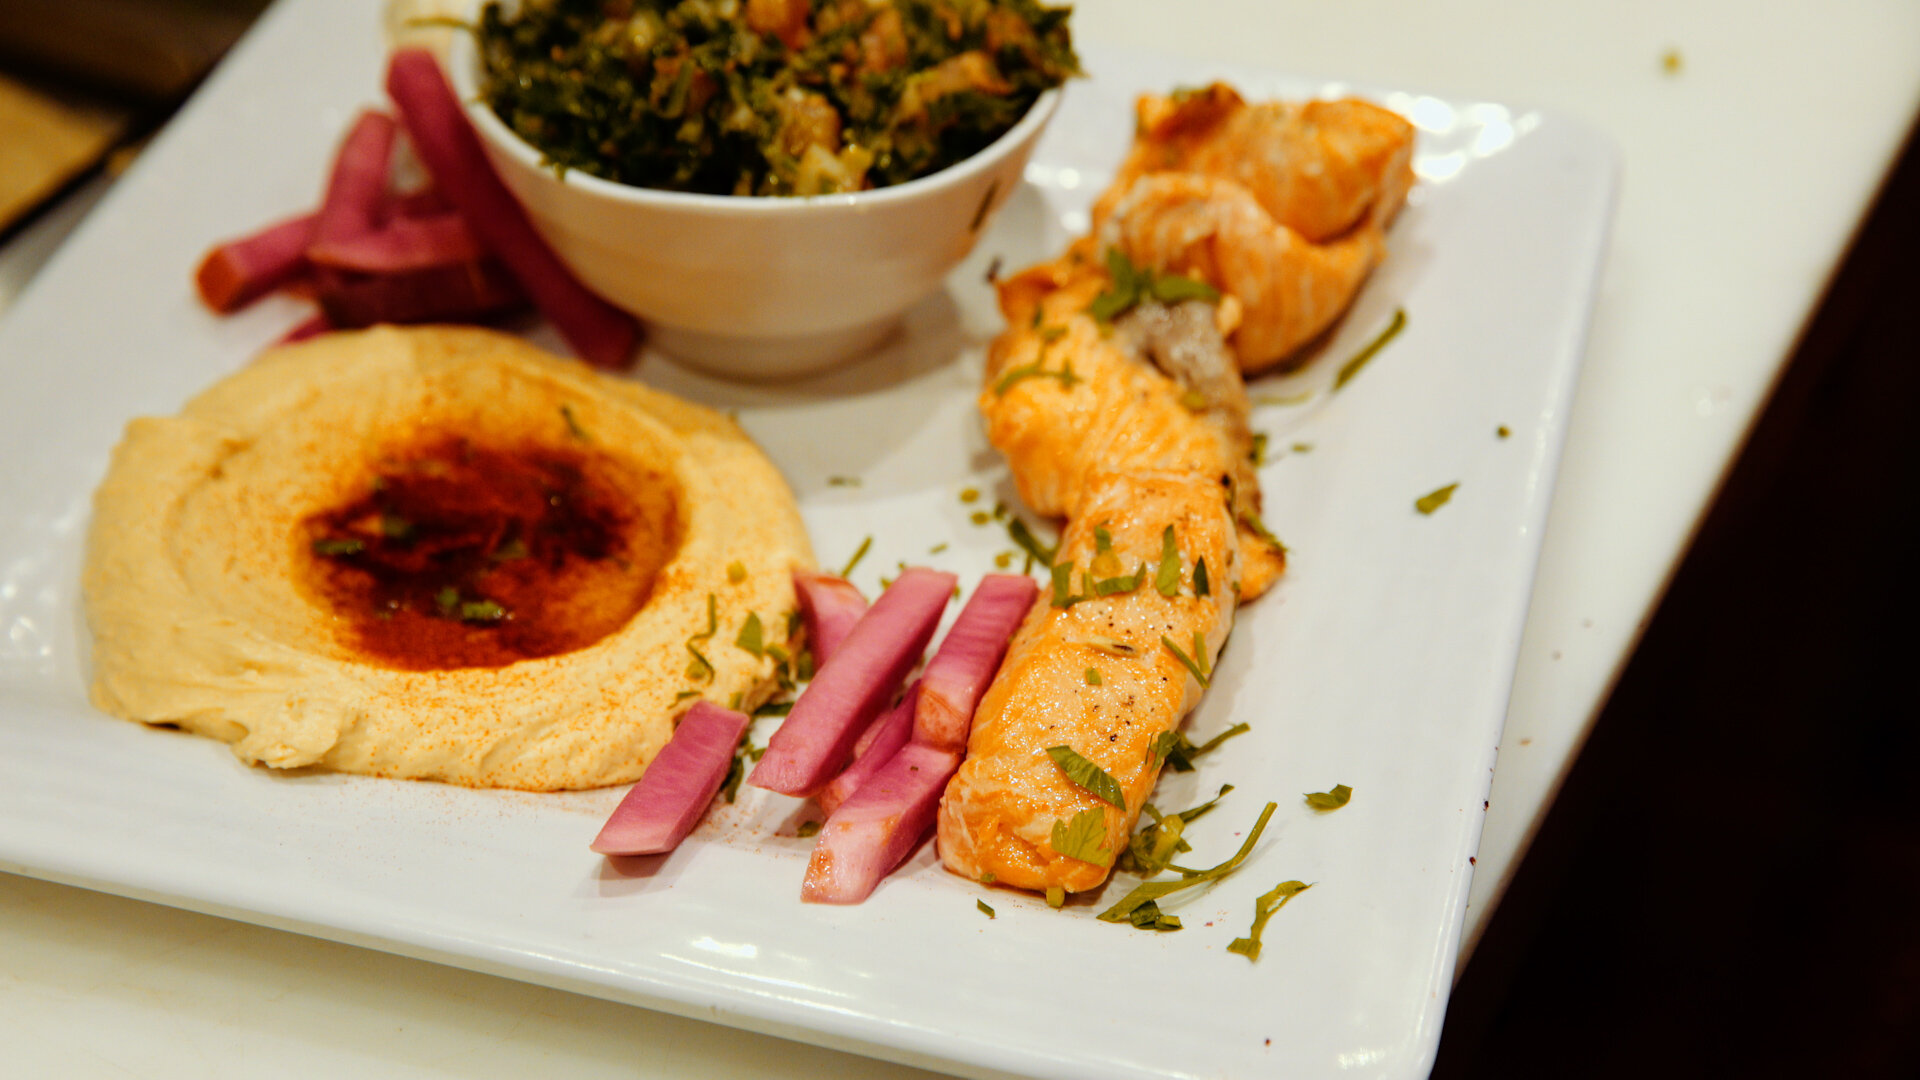 Salmon Kebab with the Tabbouleh Salad